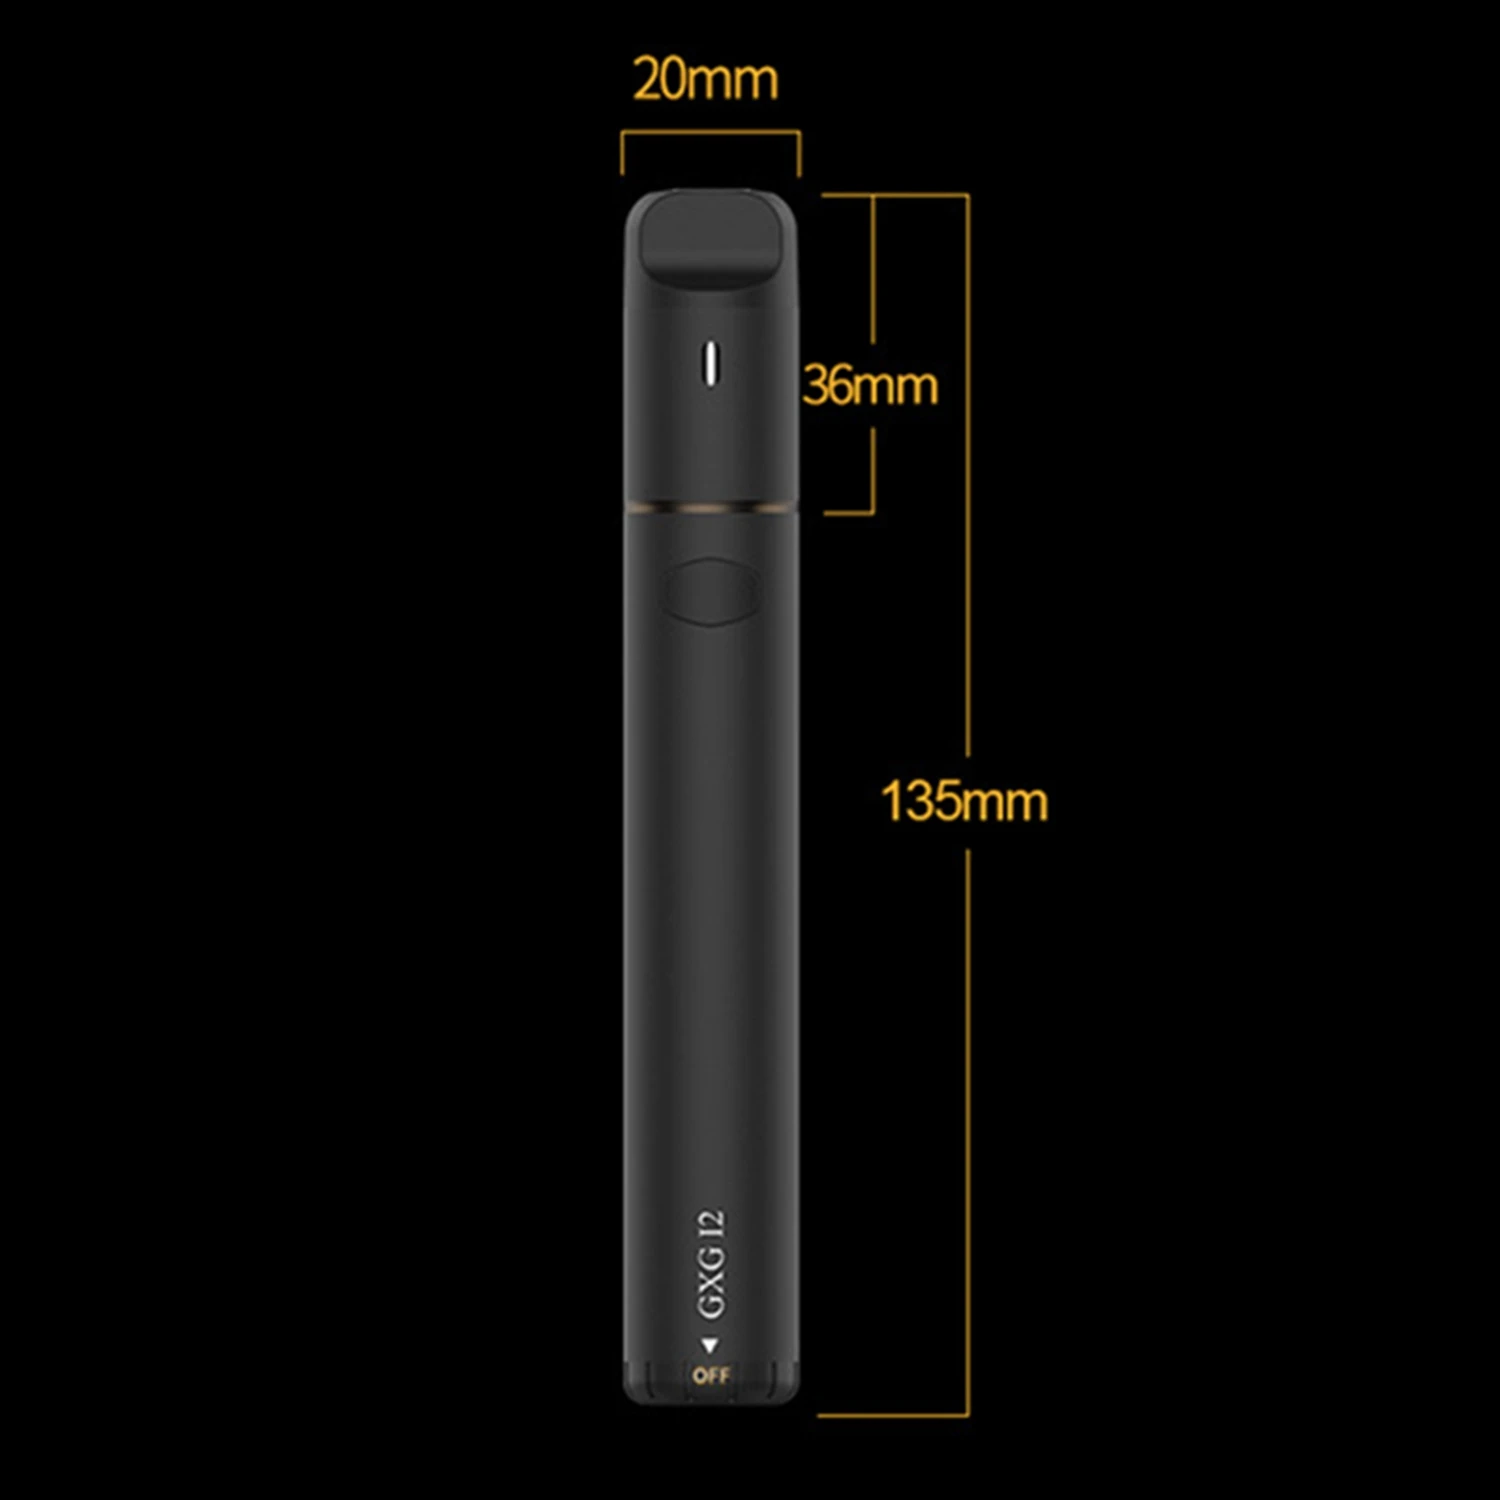 Gxg I2 Kit With 1900Mah Built-In Battery Electronic Cigarette Vape Pen With Magnetic Cover Vaporizer